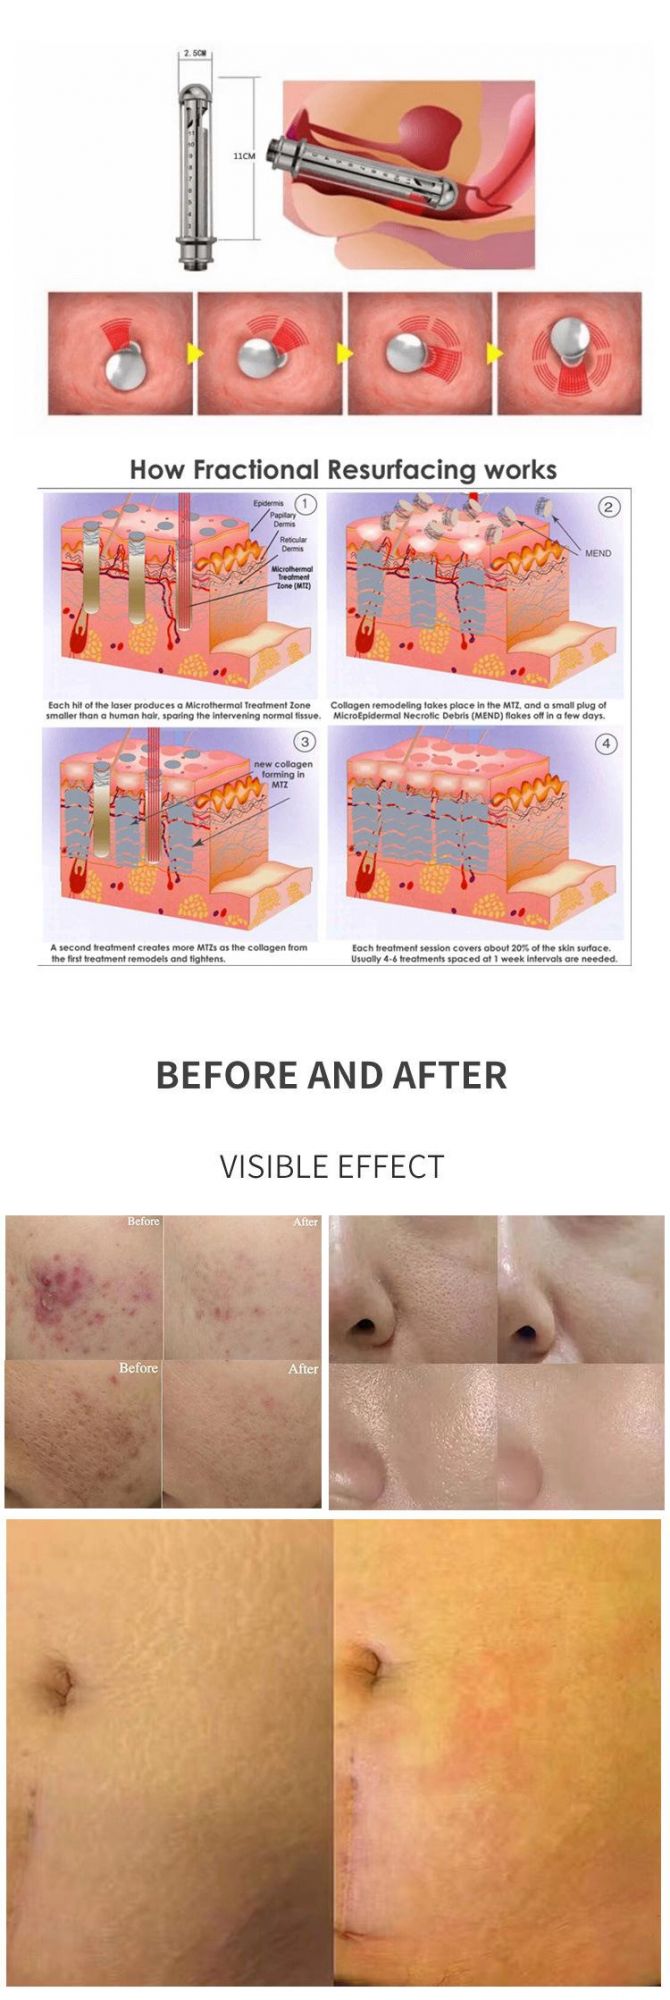 Skin Tightening Acne Treatment Machine CO2 Fractional Laser Scar Removal